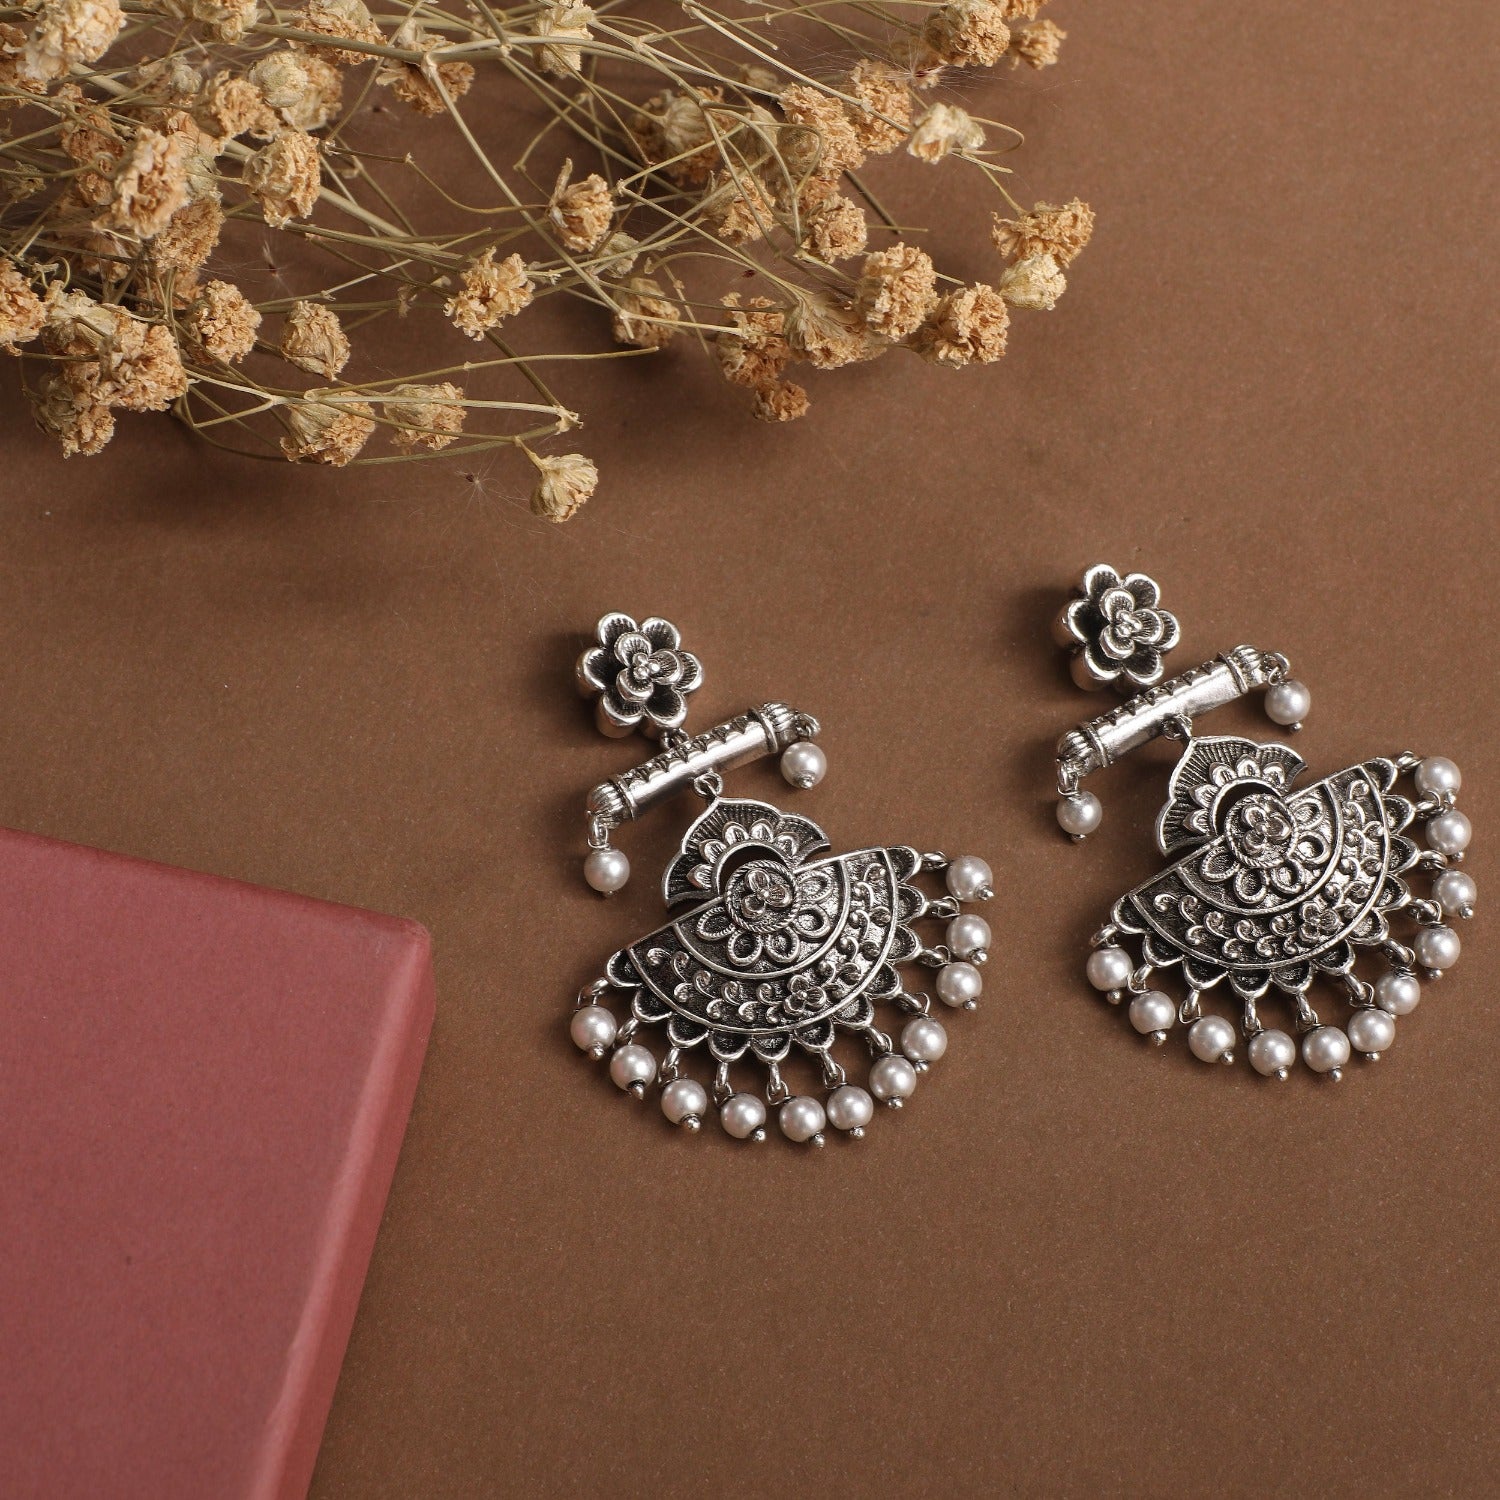 Trendy Oval Shaped Oxidised Silver Look Earrings with Ghungroo Beads |  Sasitrends | Sasitrends